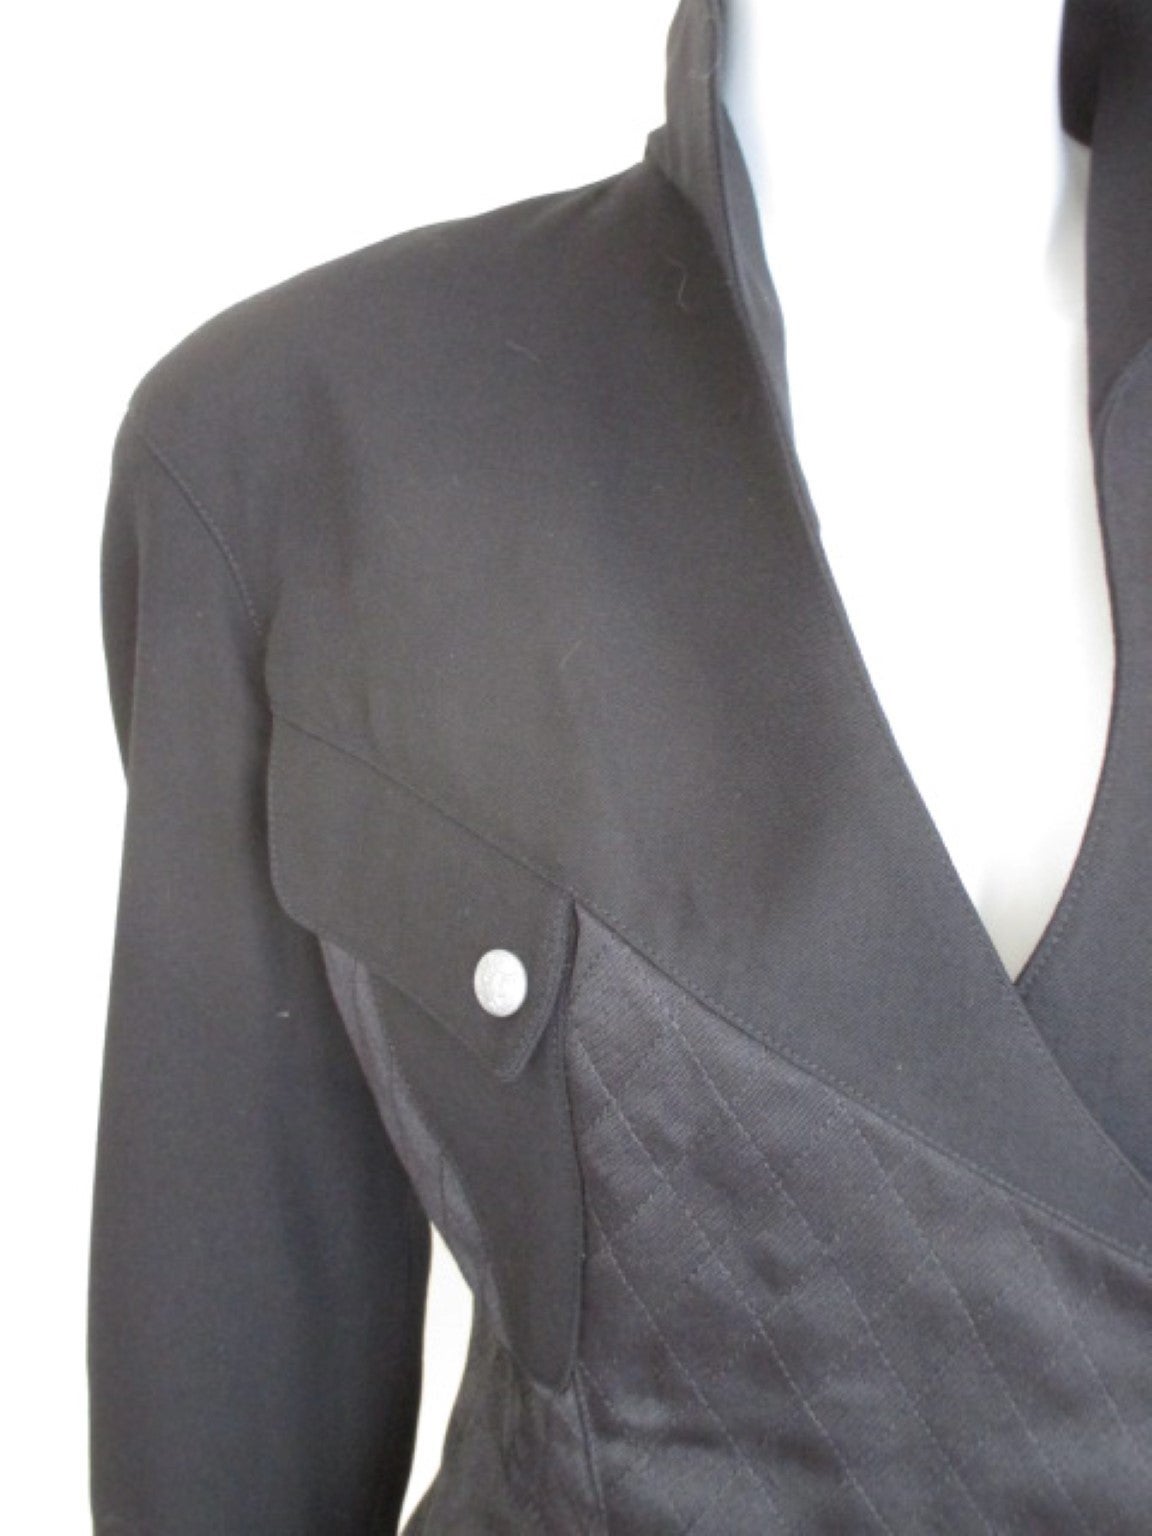 This black jacket is made from 50% wool and 50% acetate and rayon.
Fasten with 3 snaps and 1 interior snap, with a brest pocket.
Size is marked as 44 but fits about EU 38/40 - US 8, see section measurements.

Please note that vintage items are not